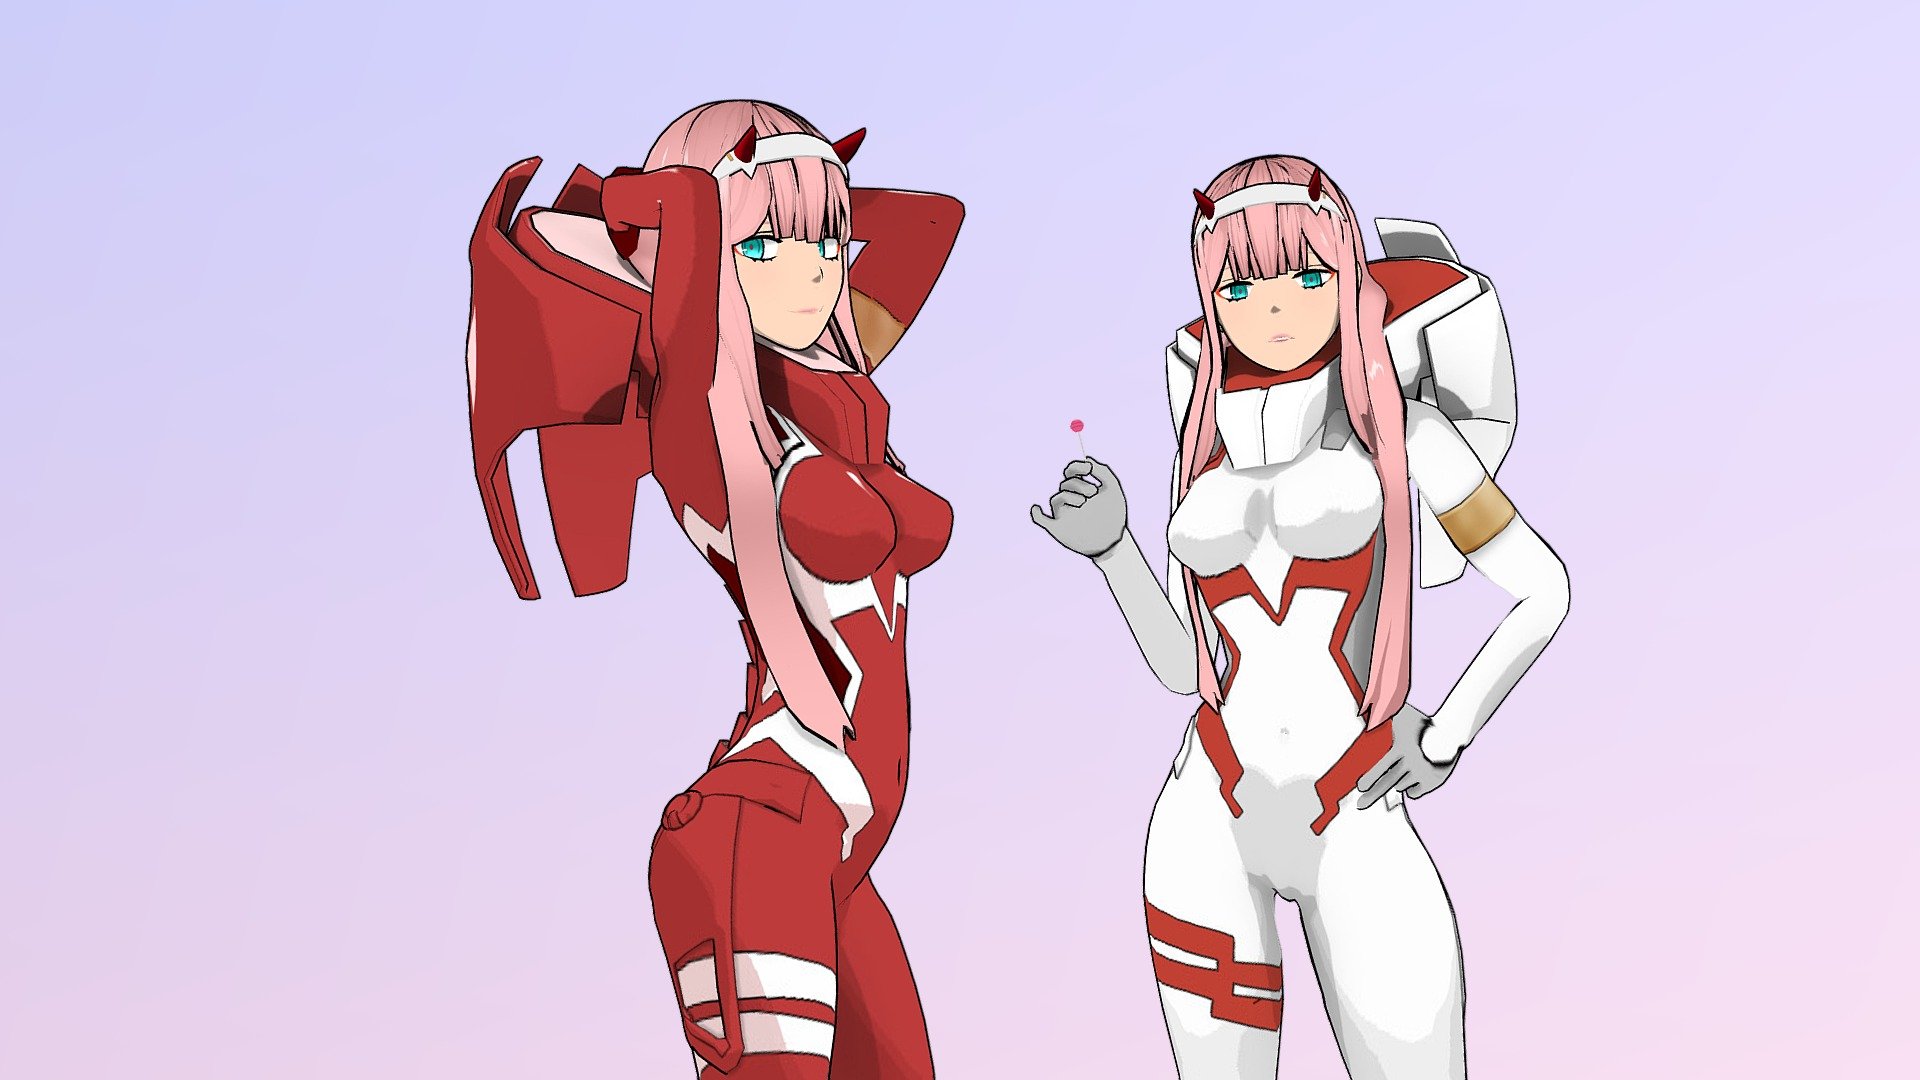 Fan art of Zero Two in her red plugsuit looking confident.
First time doing a cel shade model. Turned out looking alright.
This model has a full body rig including the face.

**Do not reupload, redistribute the model or use the model commerically. I'm open to request in terms of any changes to this model. Buyers will have access to future update of this model. **

Included download file:




T-pose

T-pose rigged

Alternative 02 rigged

non cell-shaded 02 rigged

Lolipop
 - Zero Two - (fully rigged) - Buy Royalty Free 3D model by GHPurple 3d model